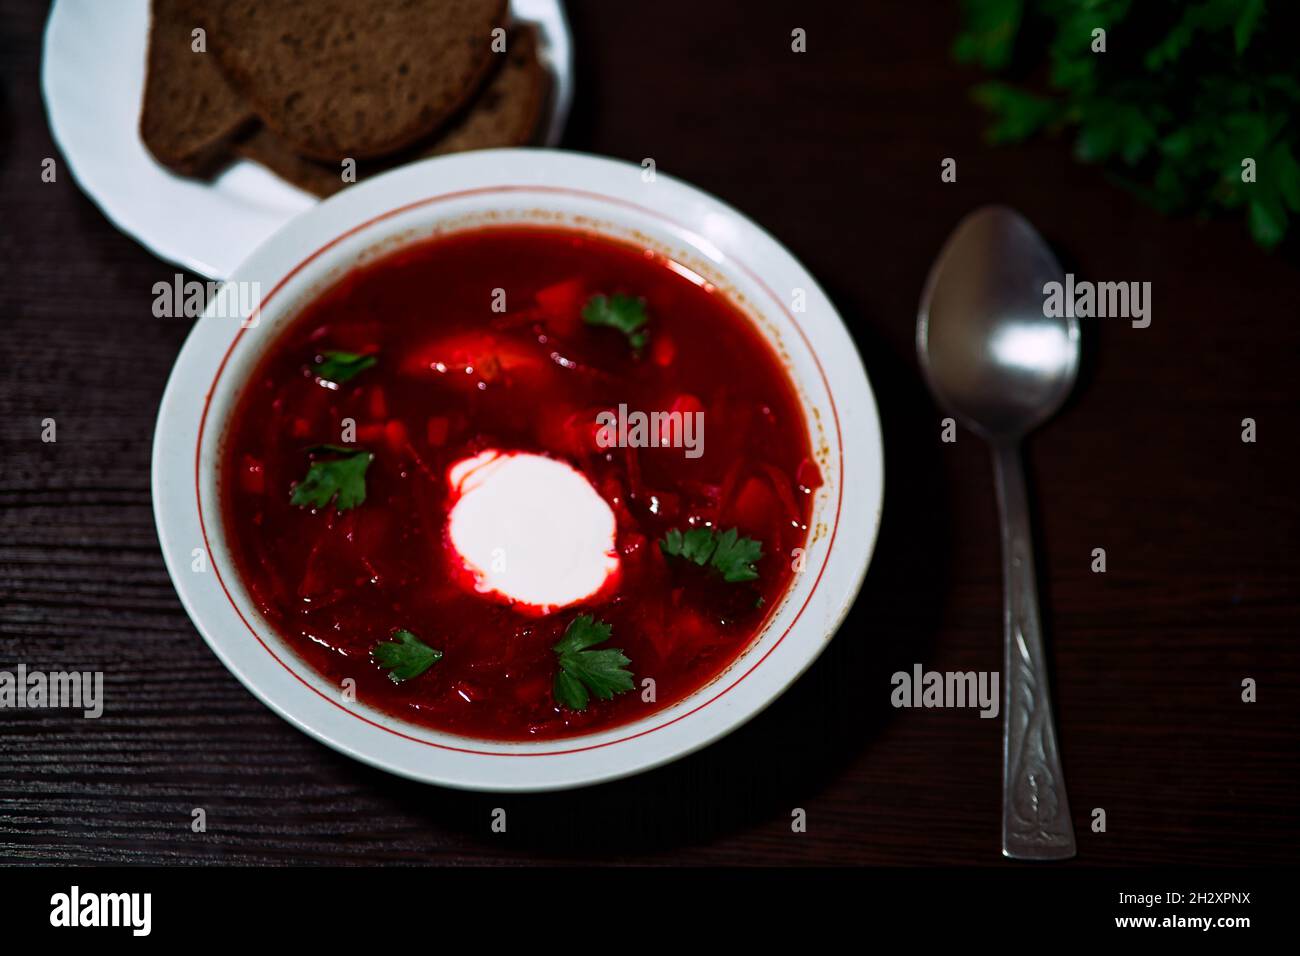 A top view of a plate of red Russian borsch on a dark surface. Stock Photo